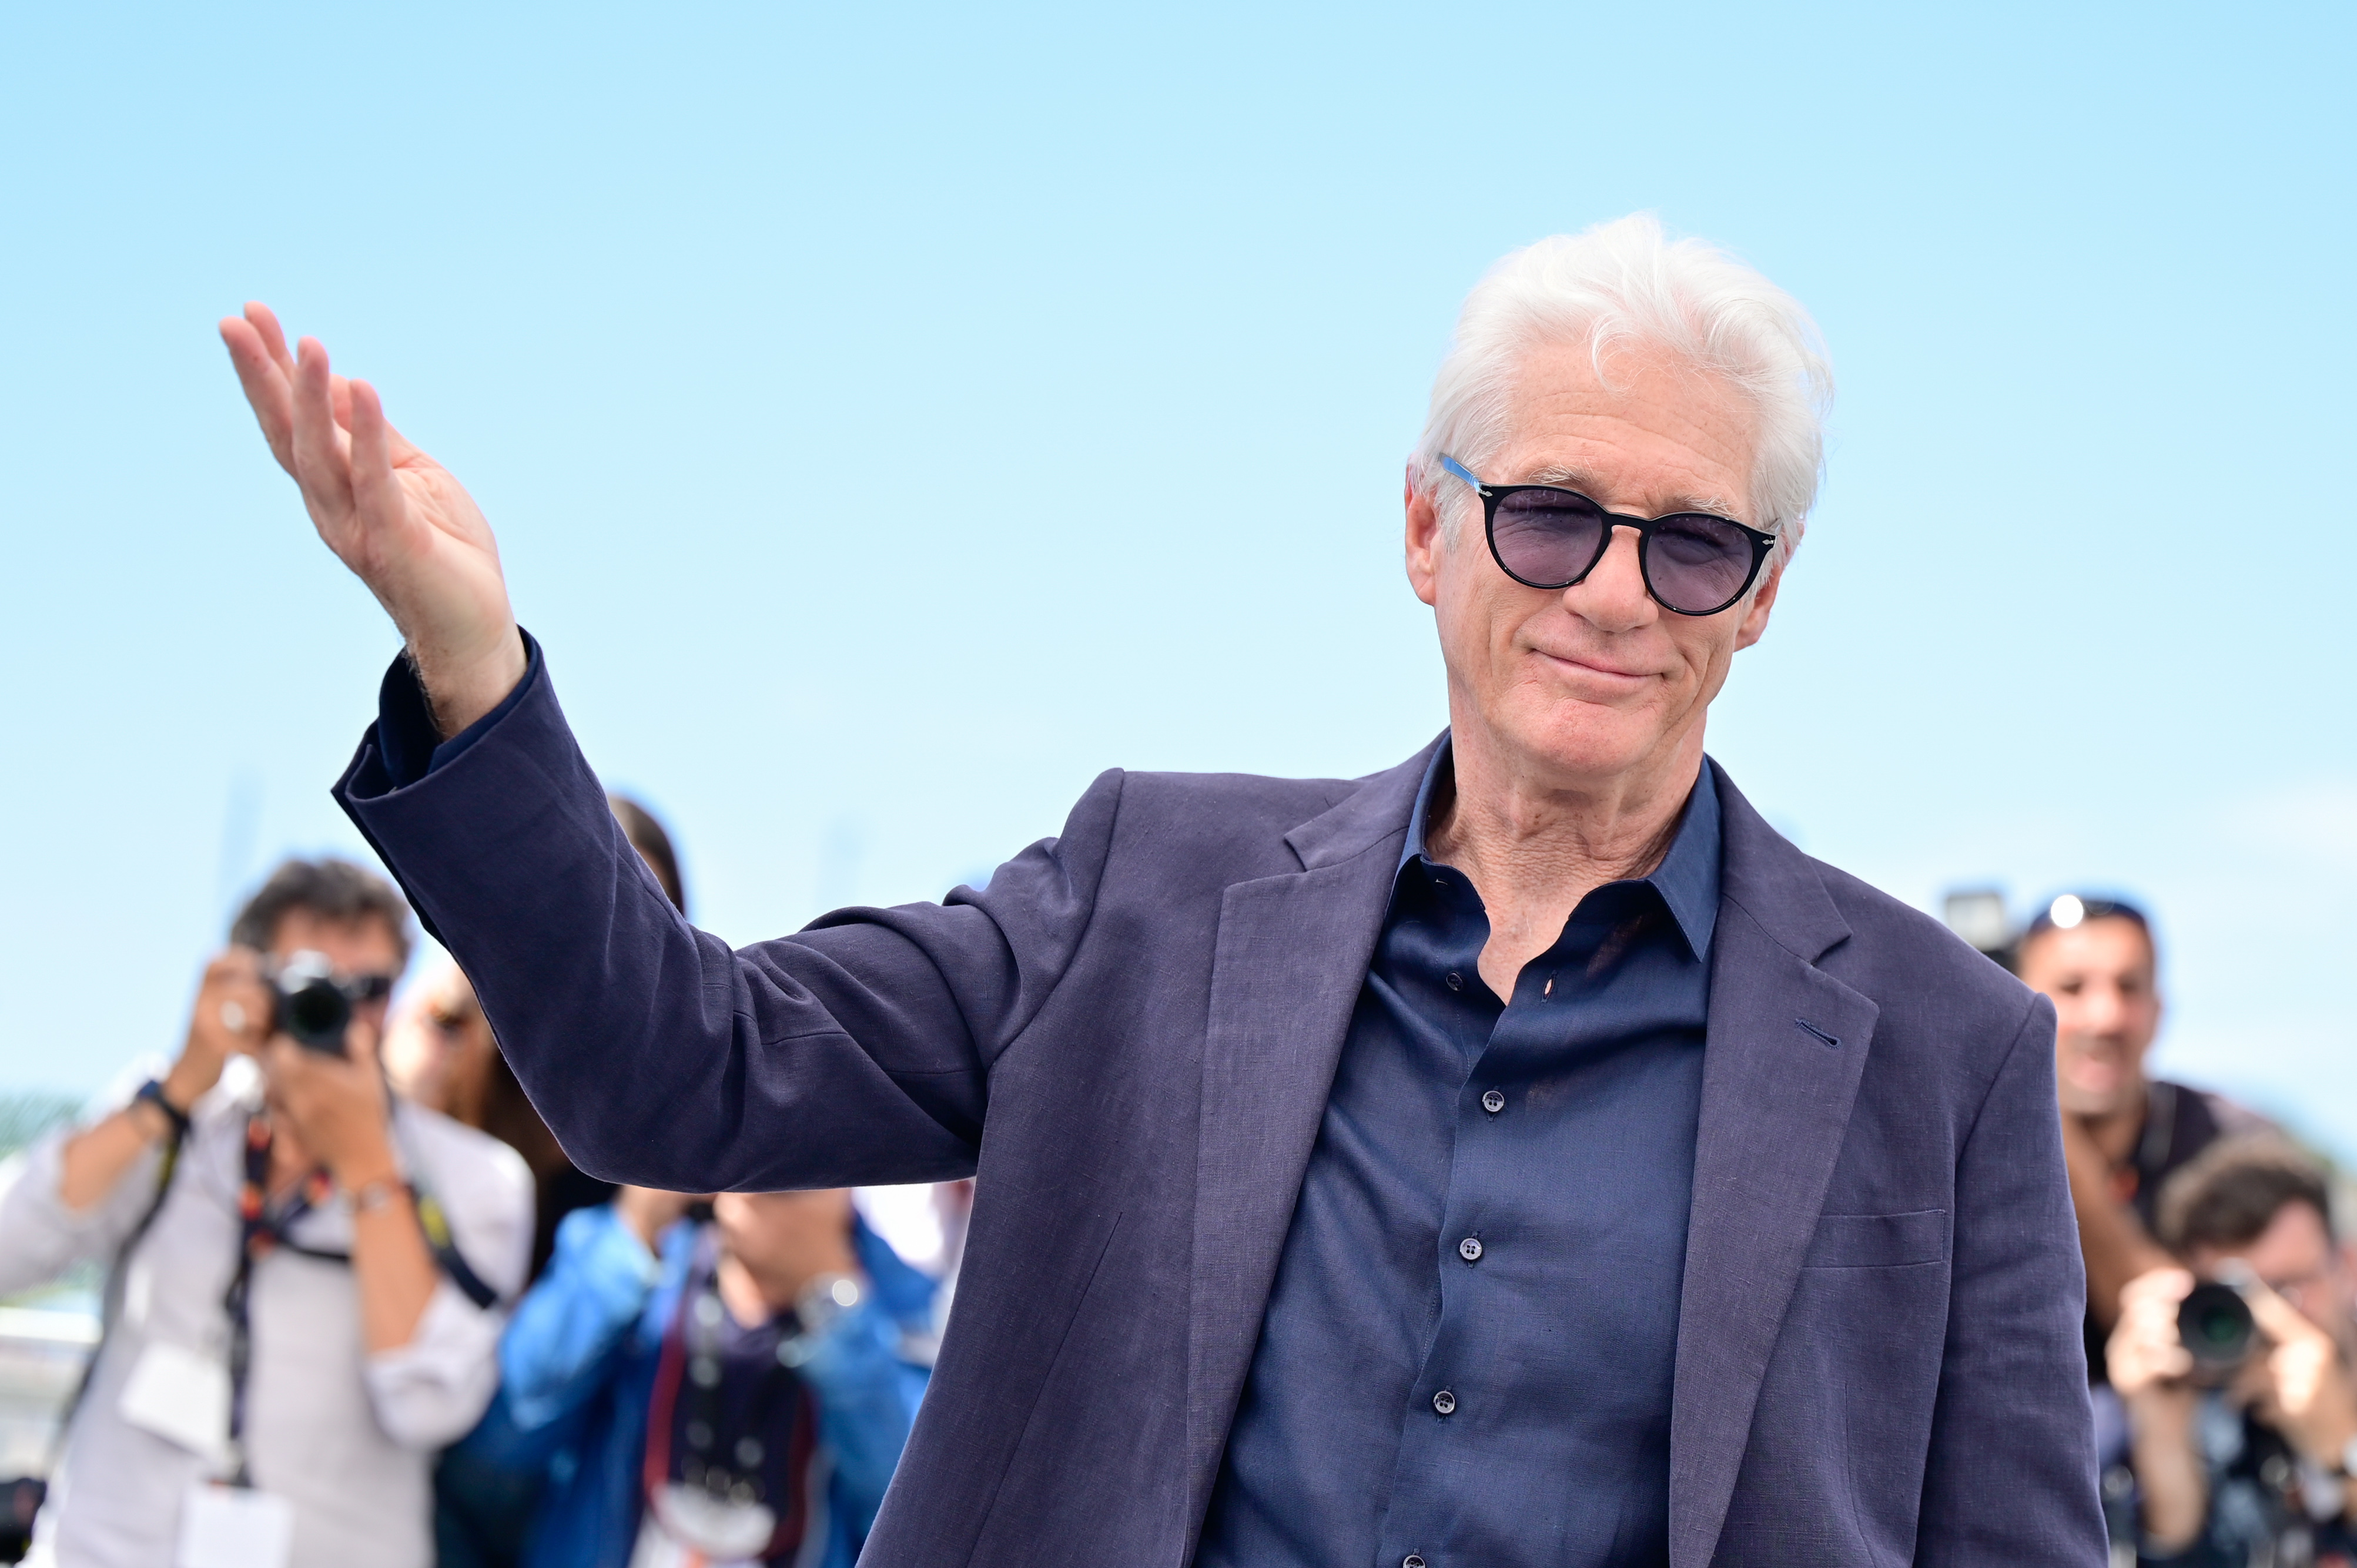 Richard Gere smiles during the "Oh, Canada" Photocall at the 77th annual Cannes Film Festival on May 18, 2024. | Source: Getty Images